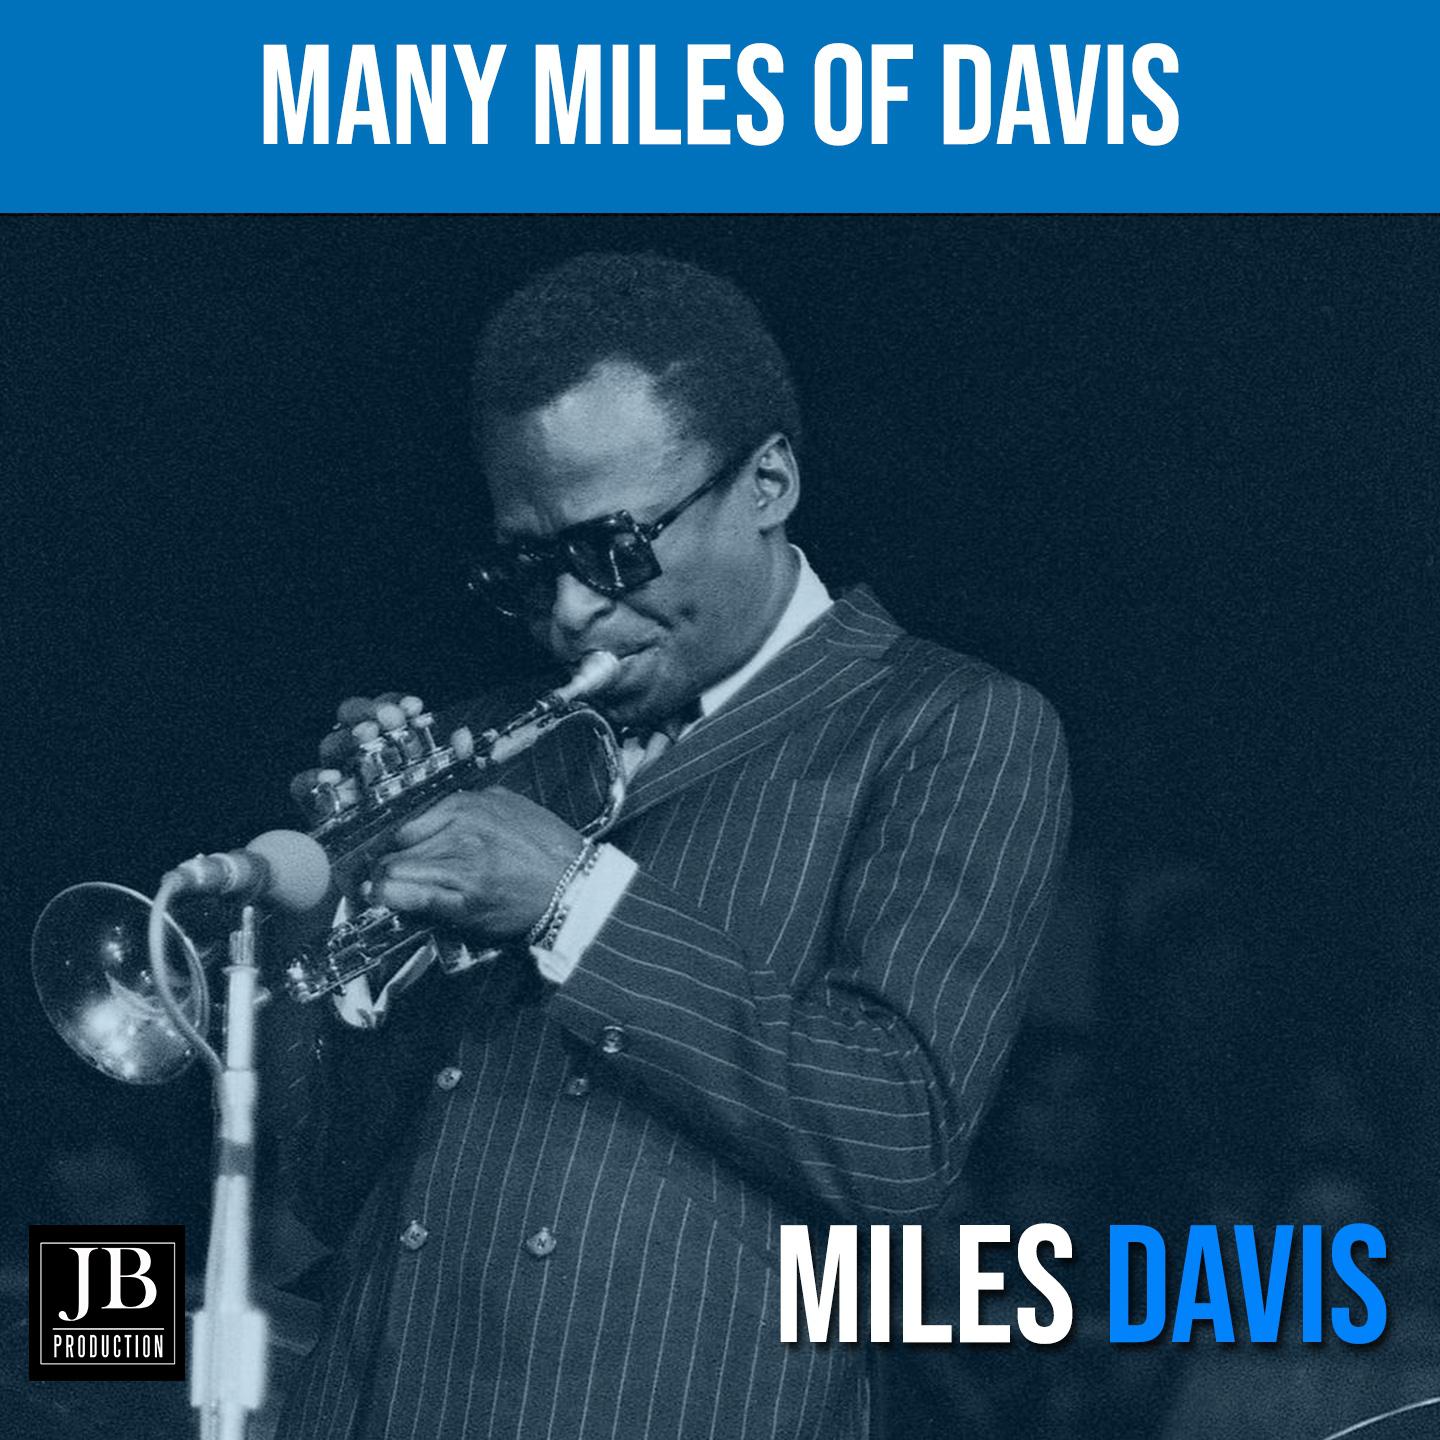 Many Miles of Davis Medley: Out Of Nowhere / A Night In Tunisia / Yardbird Suite / Ornithology / Moose The Mooch / Embraceable You / Bird Of Paradise / My Old Flame / Don't Blame Me / Scrapple From The Apple